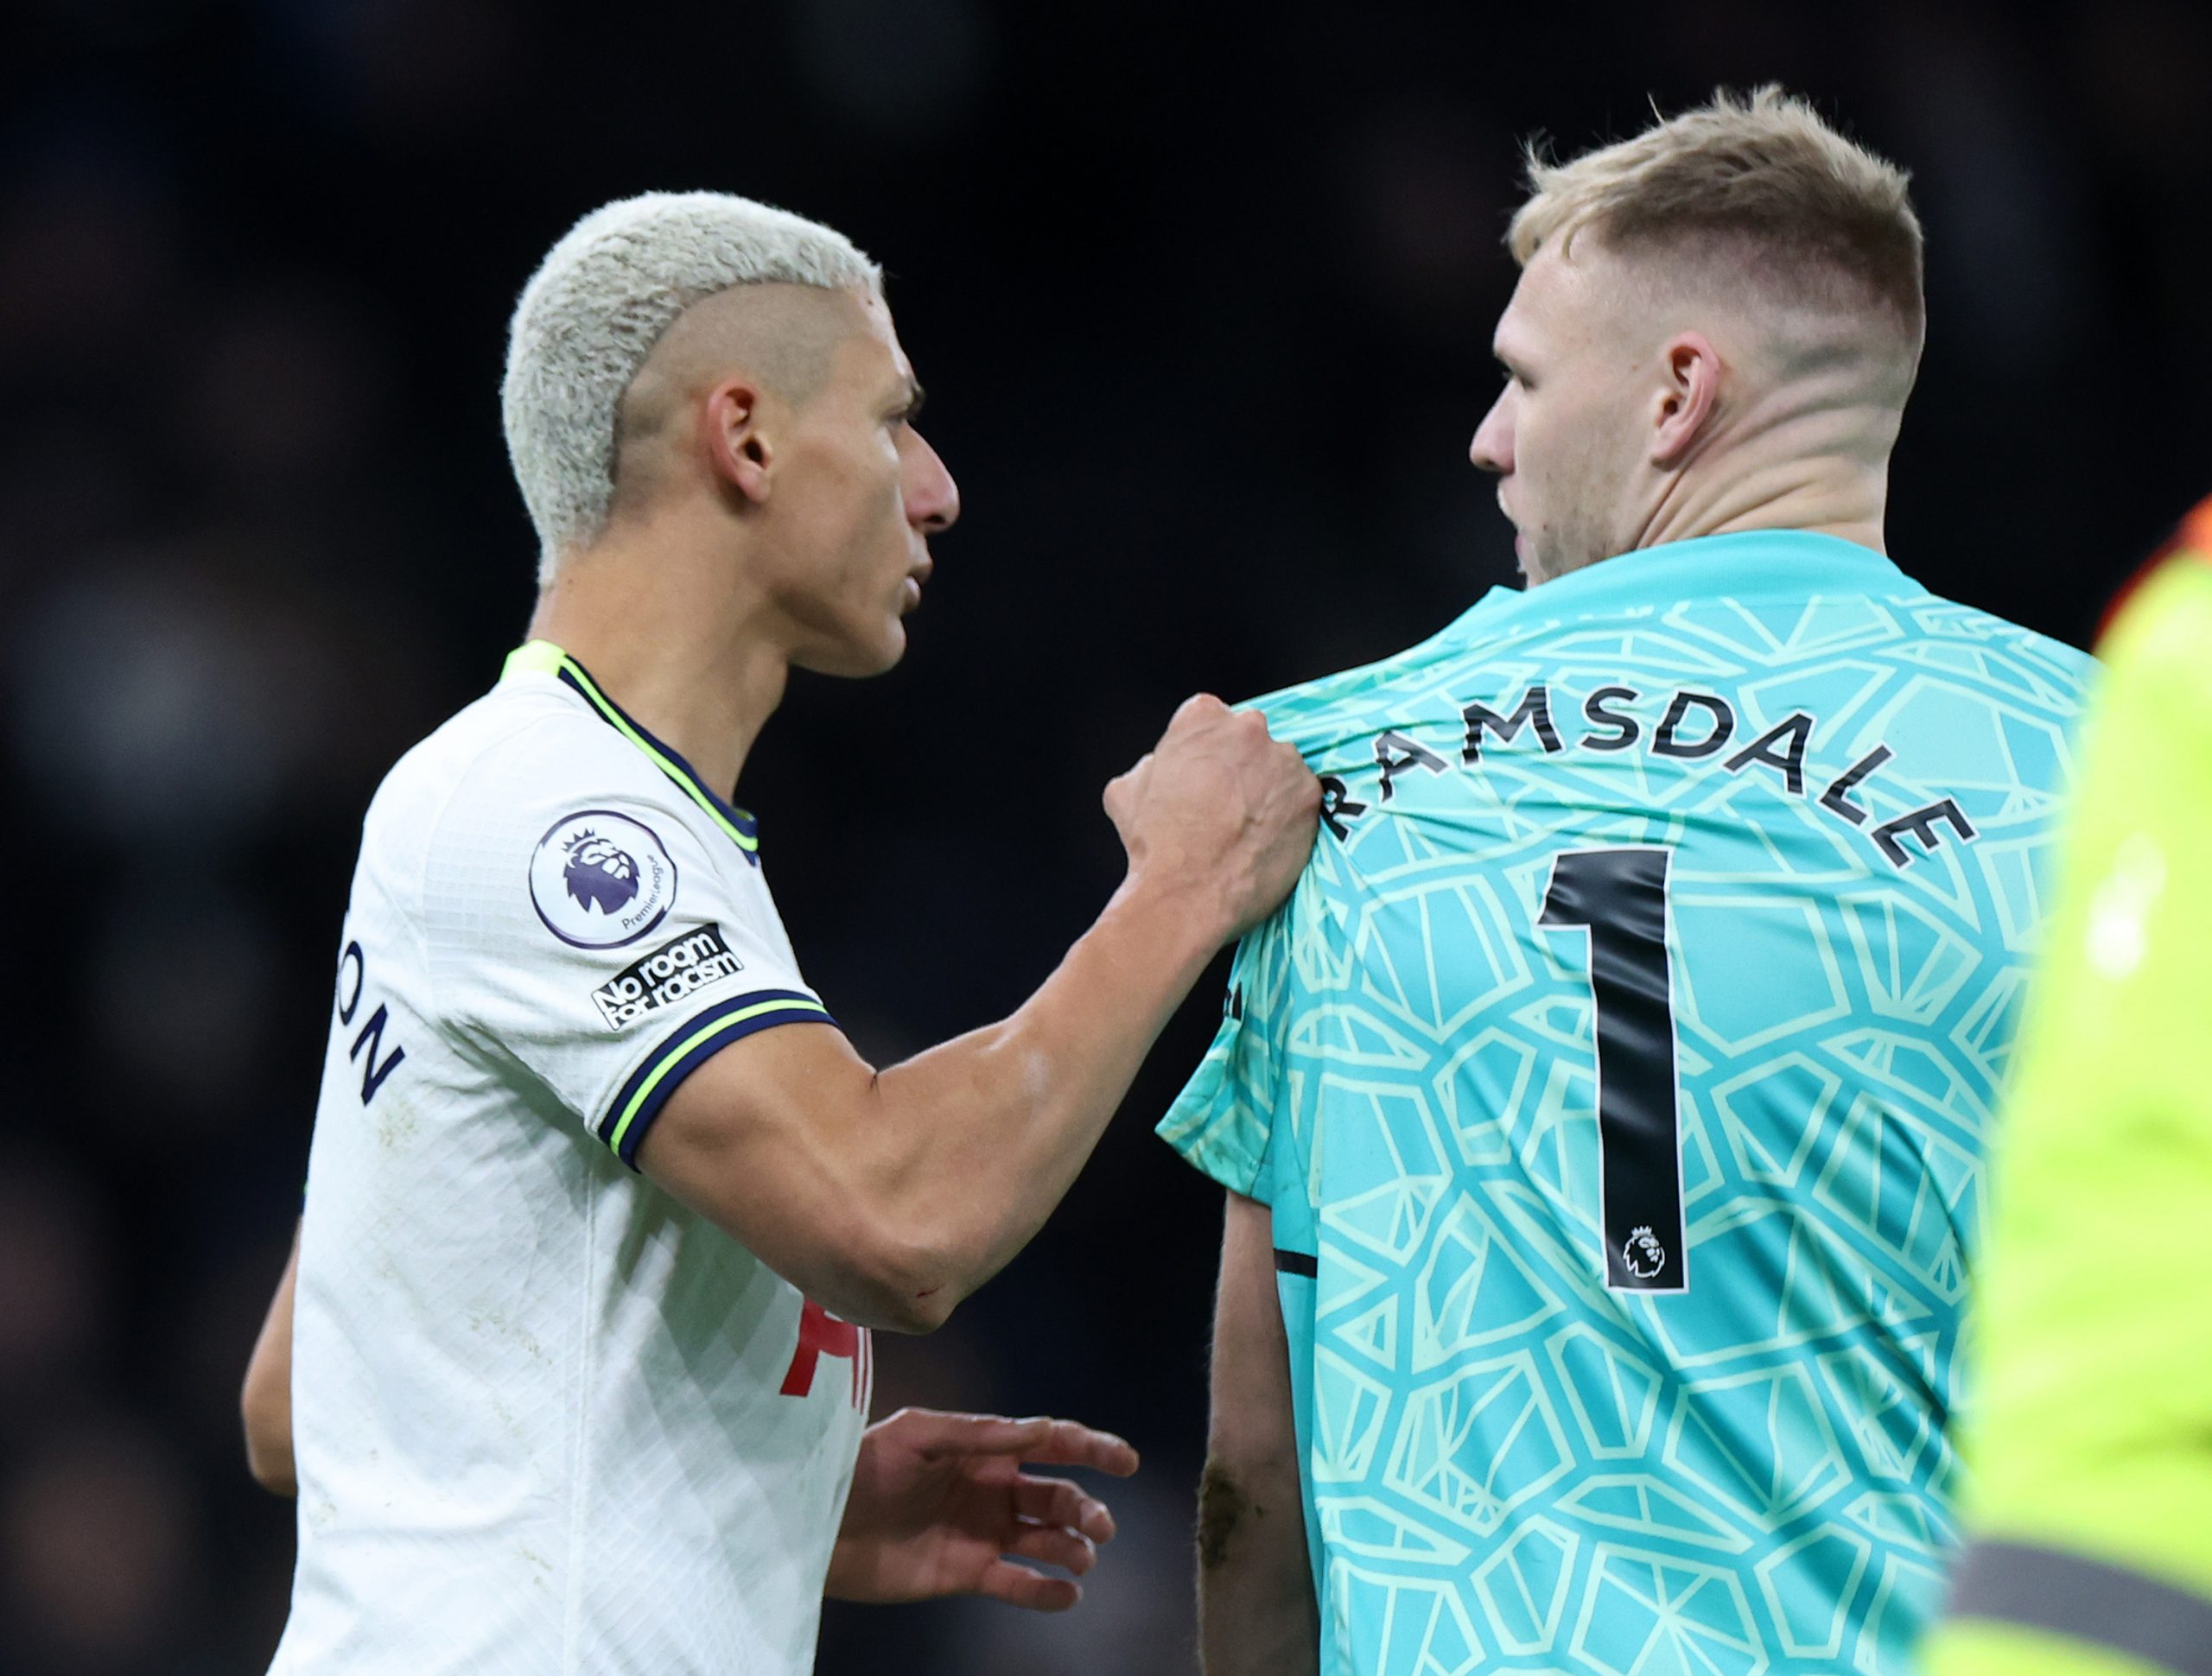 Richarlison of Tottenham Hotspur clashes with Aaron Ramsdale of Arsenal at full time - January 2023. (Photo by Catherine Ivill/Getty Images)